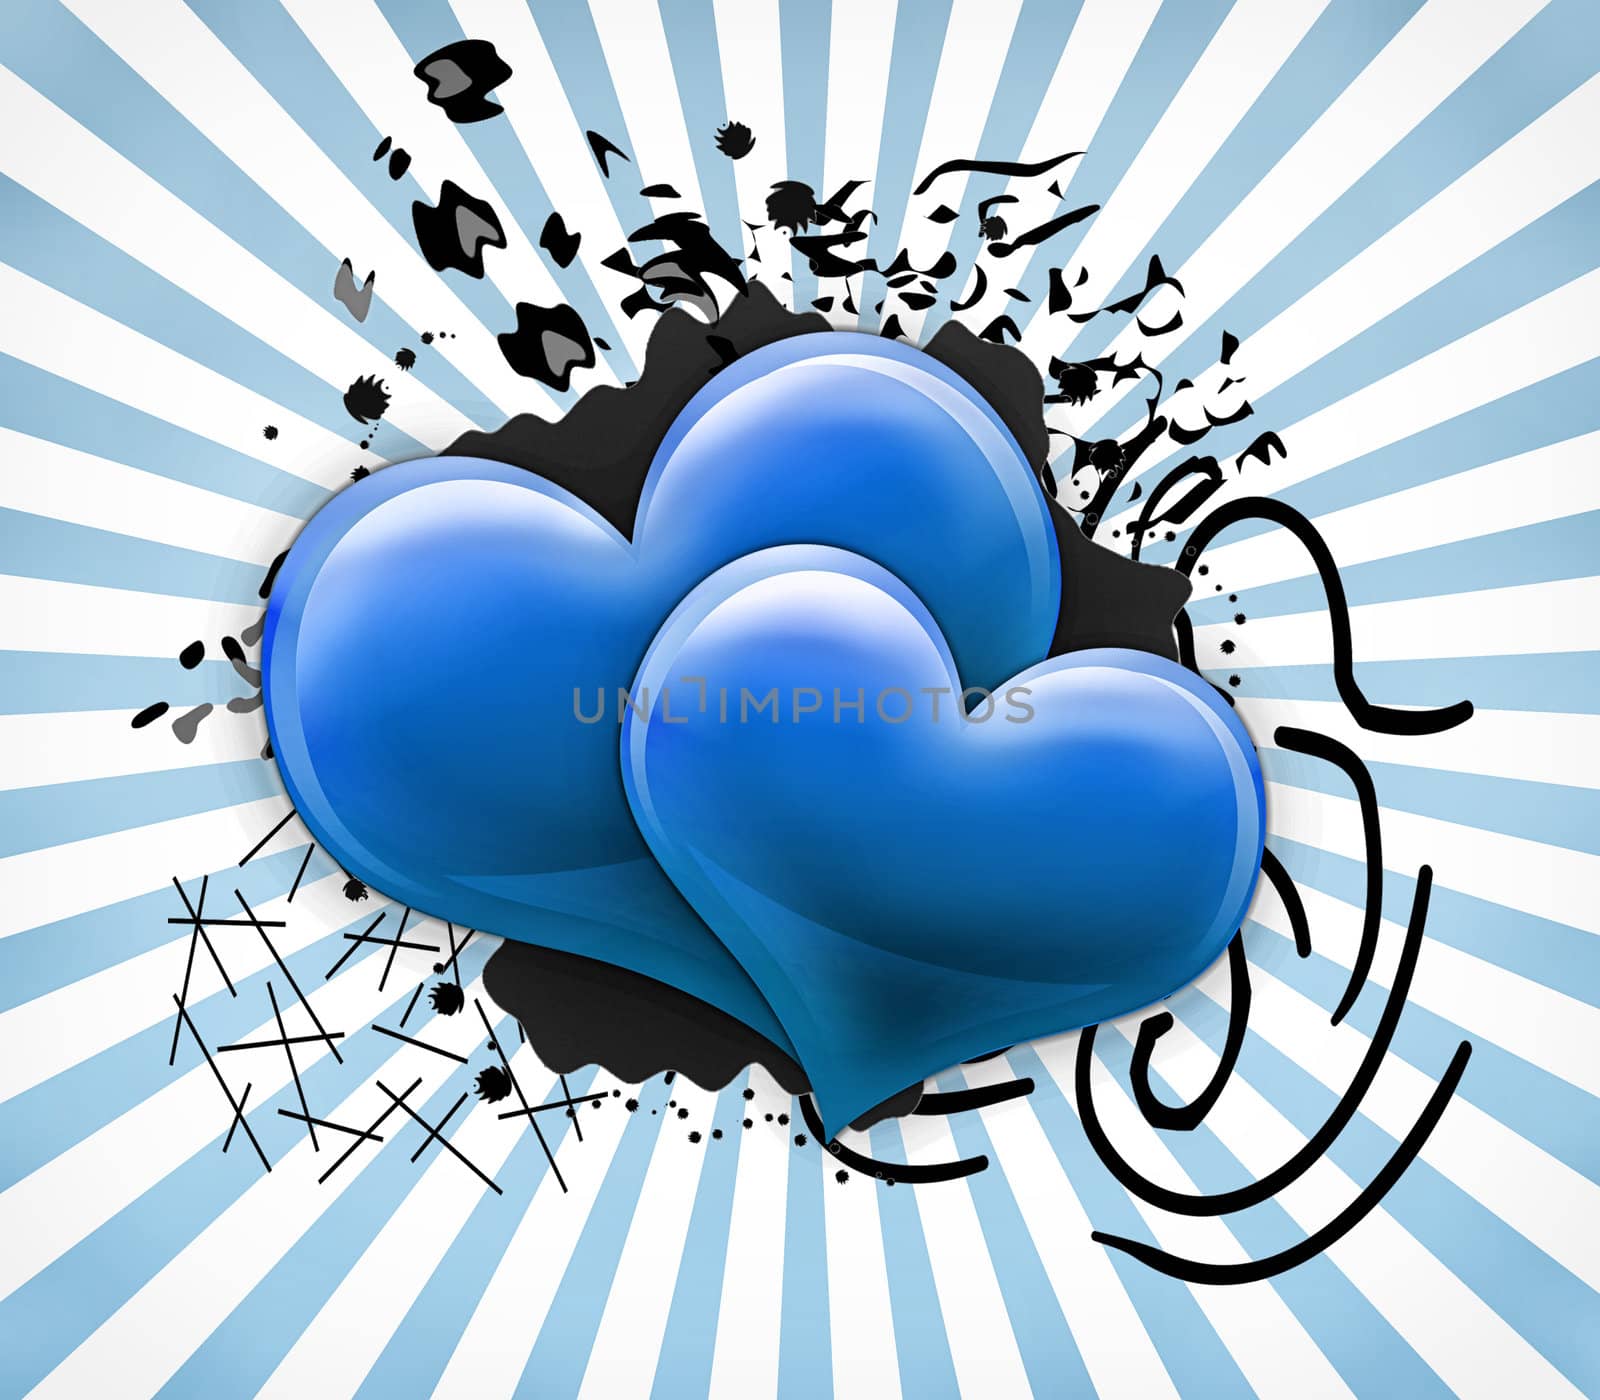 Valentines Day Card with two big blue hearts 